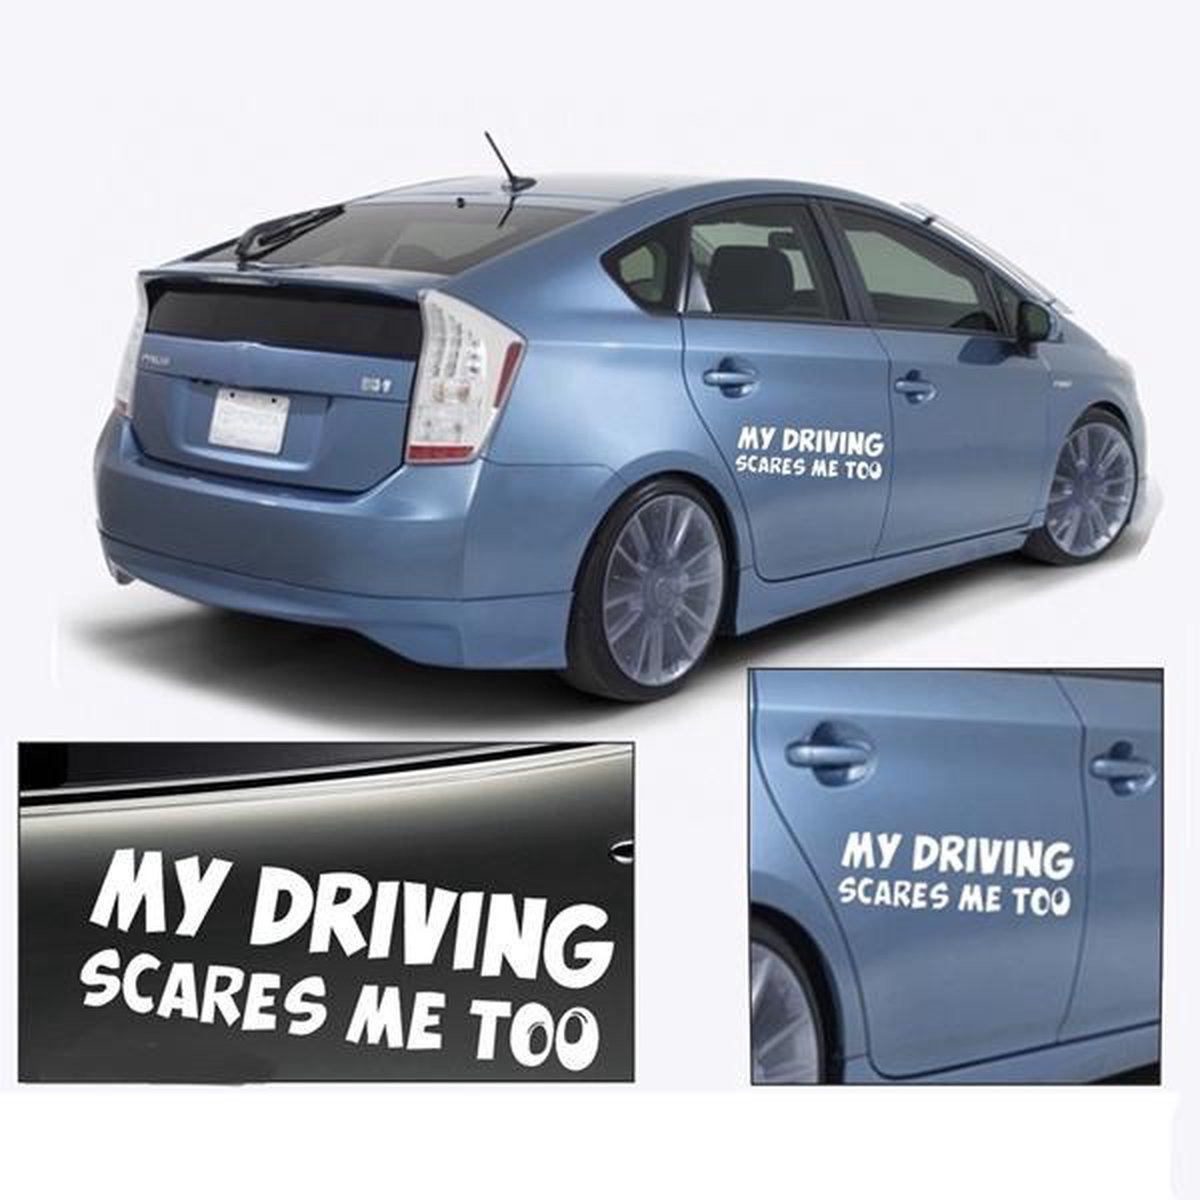 My Driving Scares Me Too Auto Car Trunk Thriller Rear Window Body Sticker  - Sale price - Buy online in Pakistan 